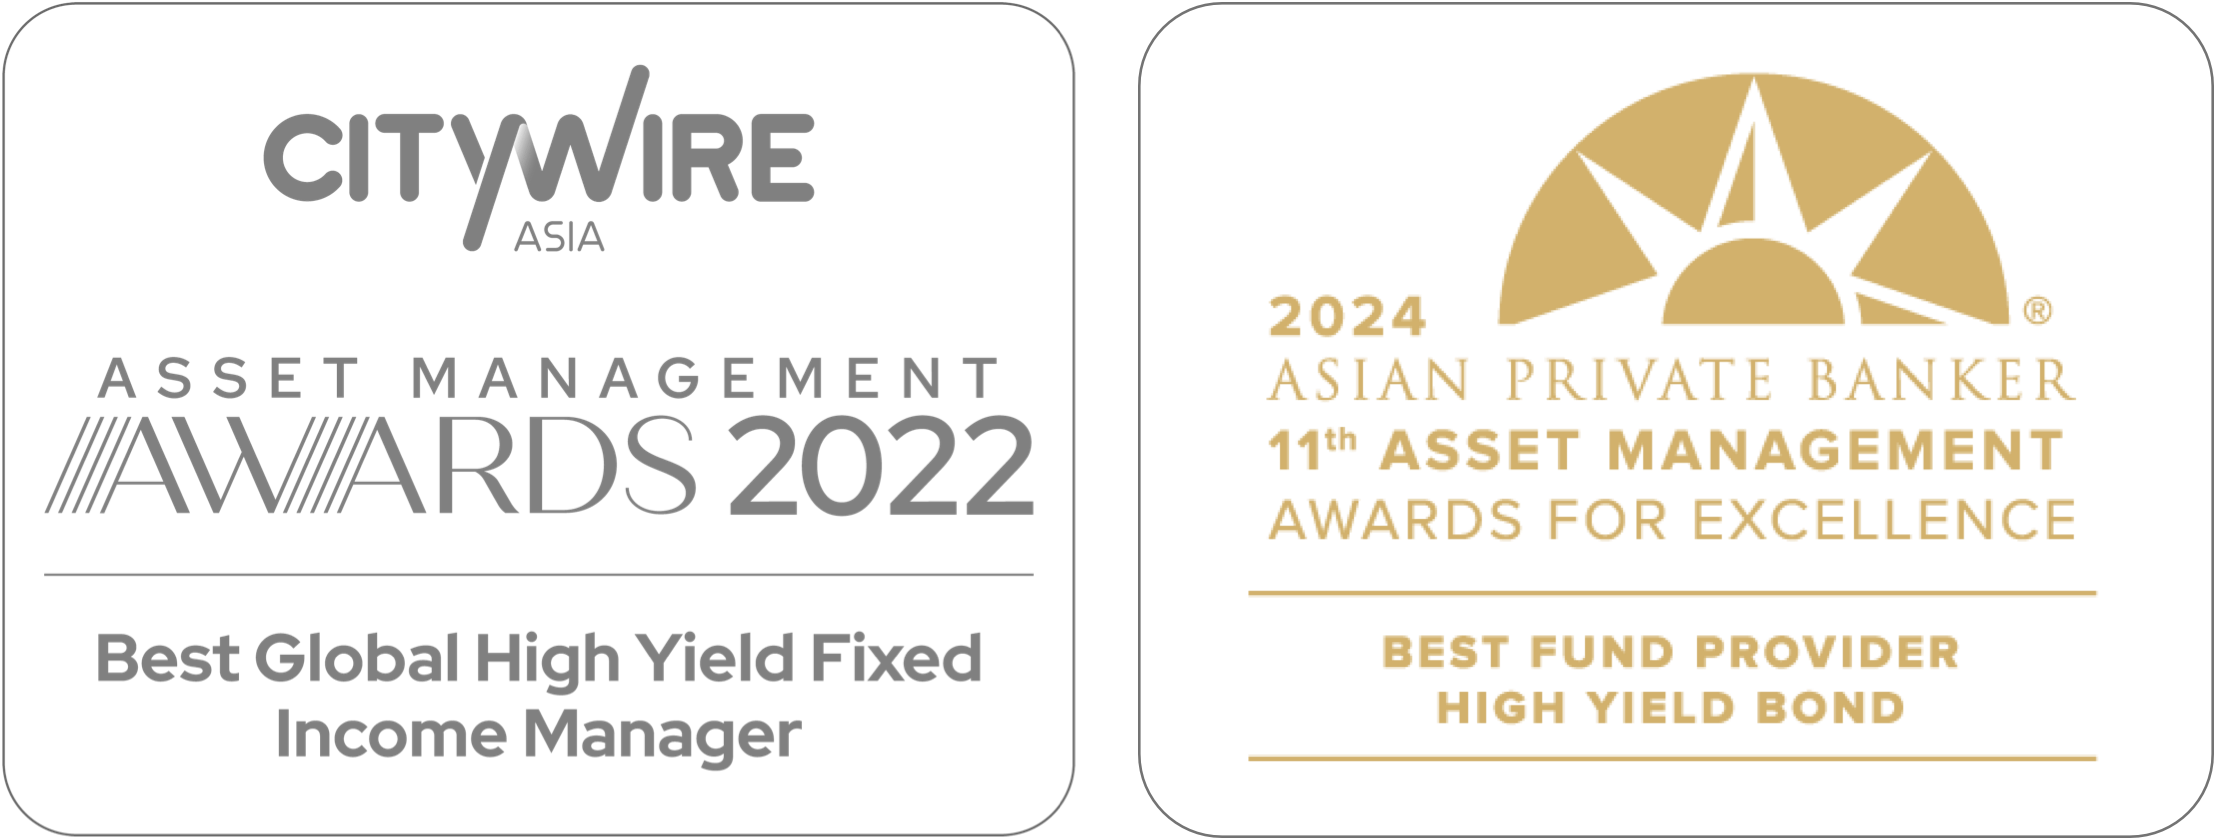 citywire-asia-award-image1.png